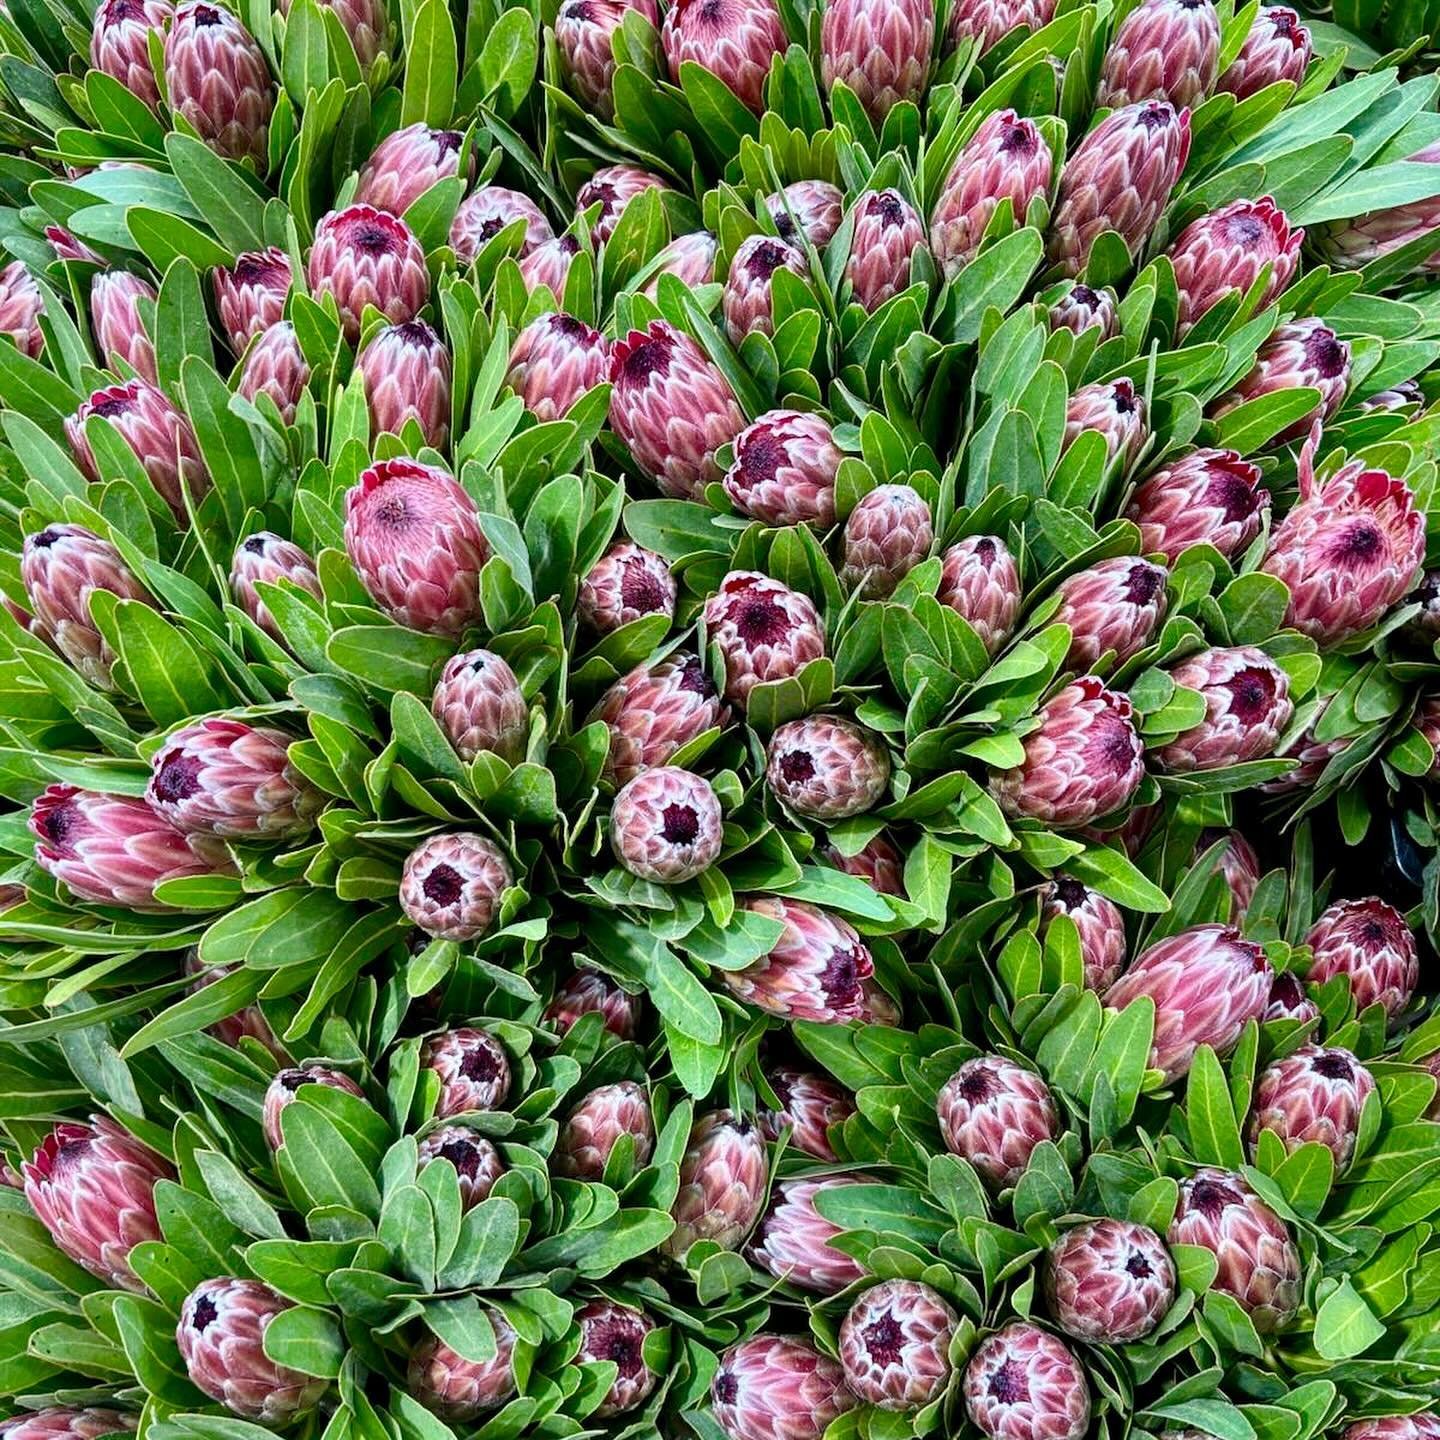 NEW Arrivals - The gorgeous pink ice protea!🌸

We know they&rsquo;re your absolute favourite and guess what! we have heaps of them in-store now.😍

Head down to the Herdie🌿 We are open today until 8pm and all weekend long.

.
.
.
#blooms #celebrate